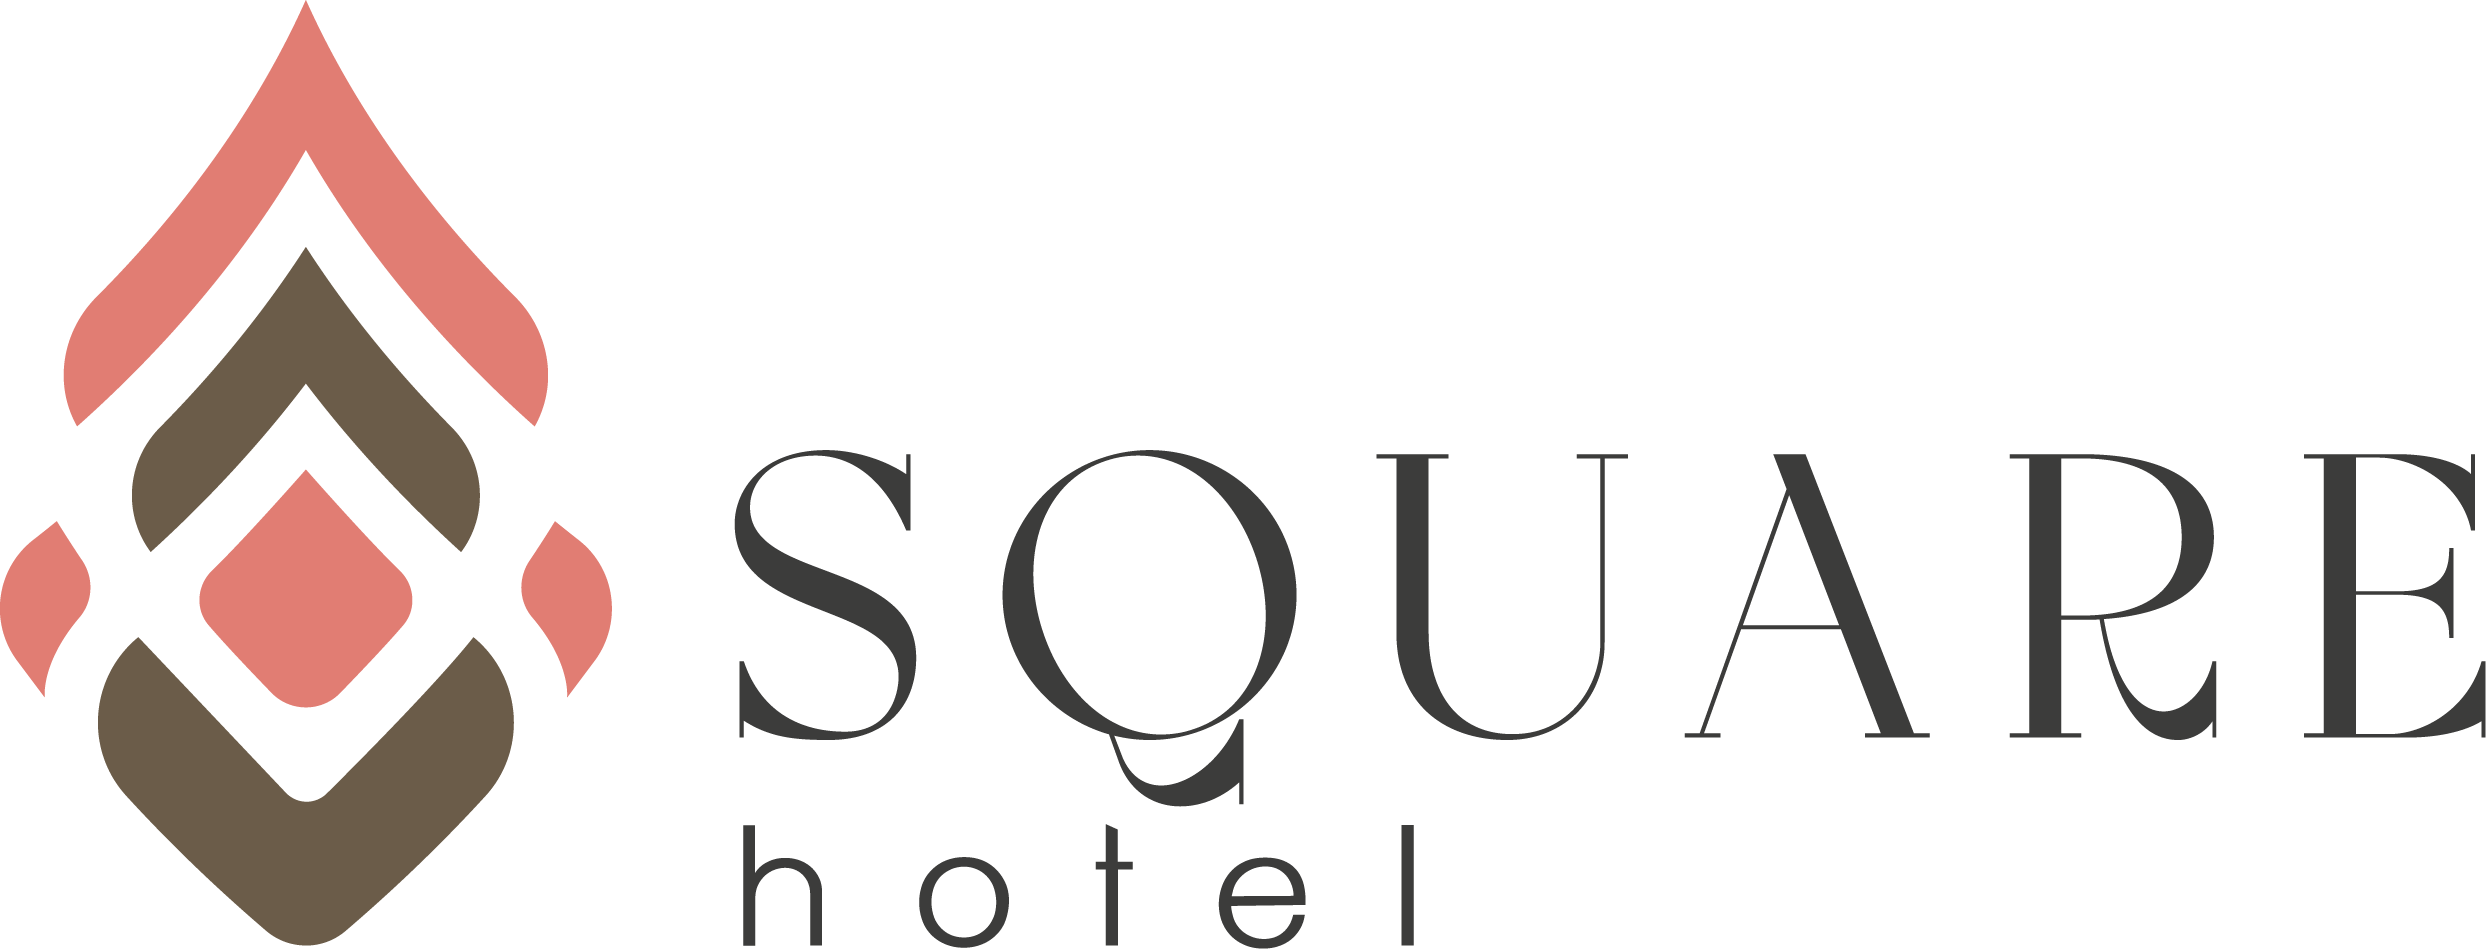 Square Hotel, Nepal - Official Site